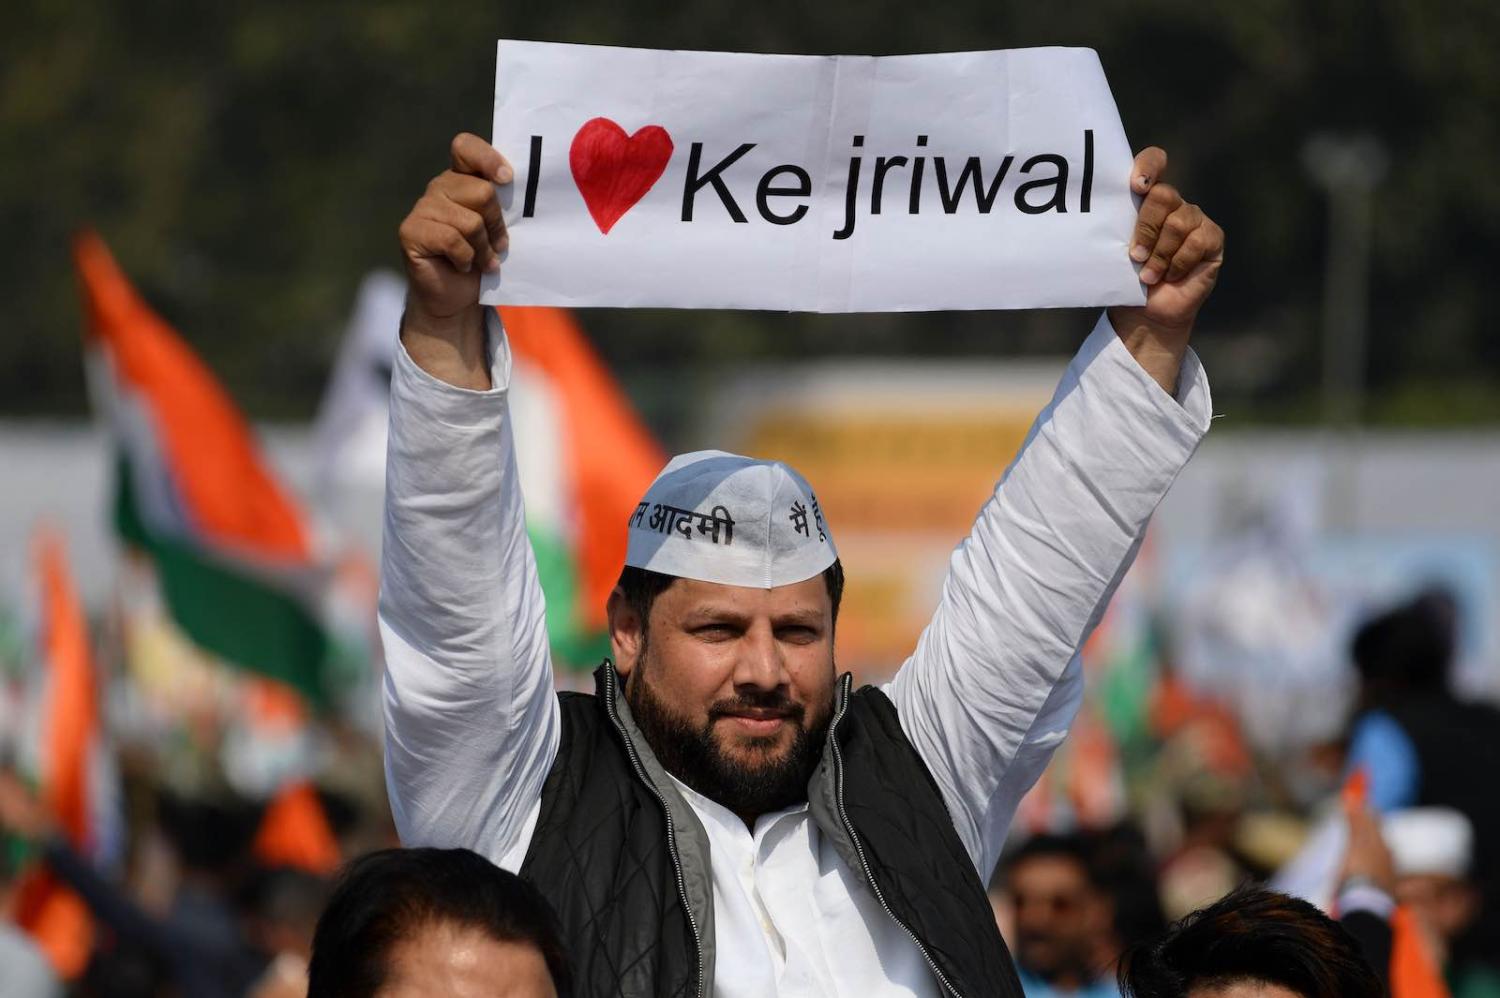 A supporter of the Aam Aadmi Party after Arvind Kejriwal’s victory as Delhi Chief Minister (Photo: Sajjad Hussain/AFP/Getty Images)